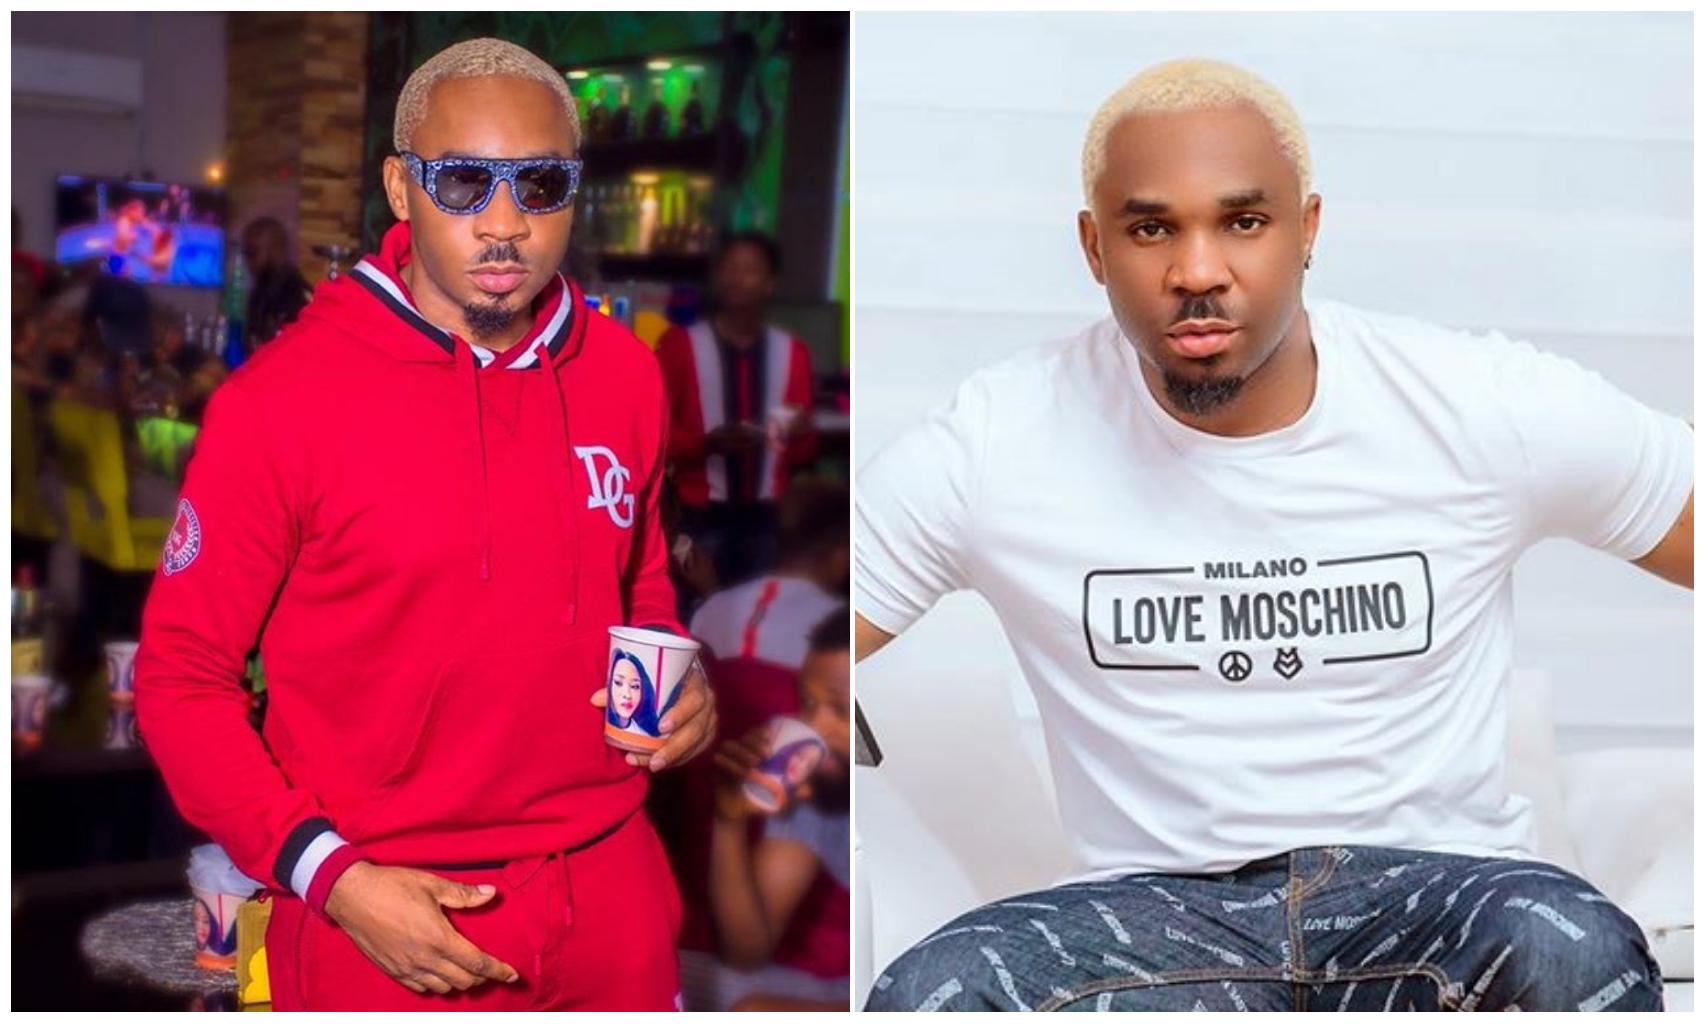 Ladies have tried to charm me but it didn't work – Socialite Pretty Mike opens up